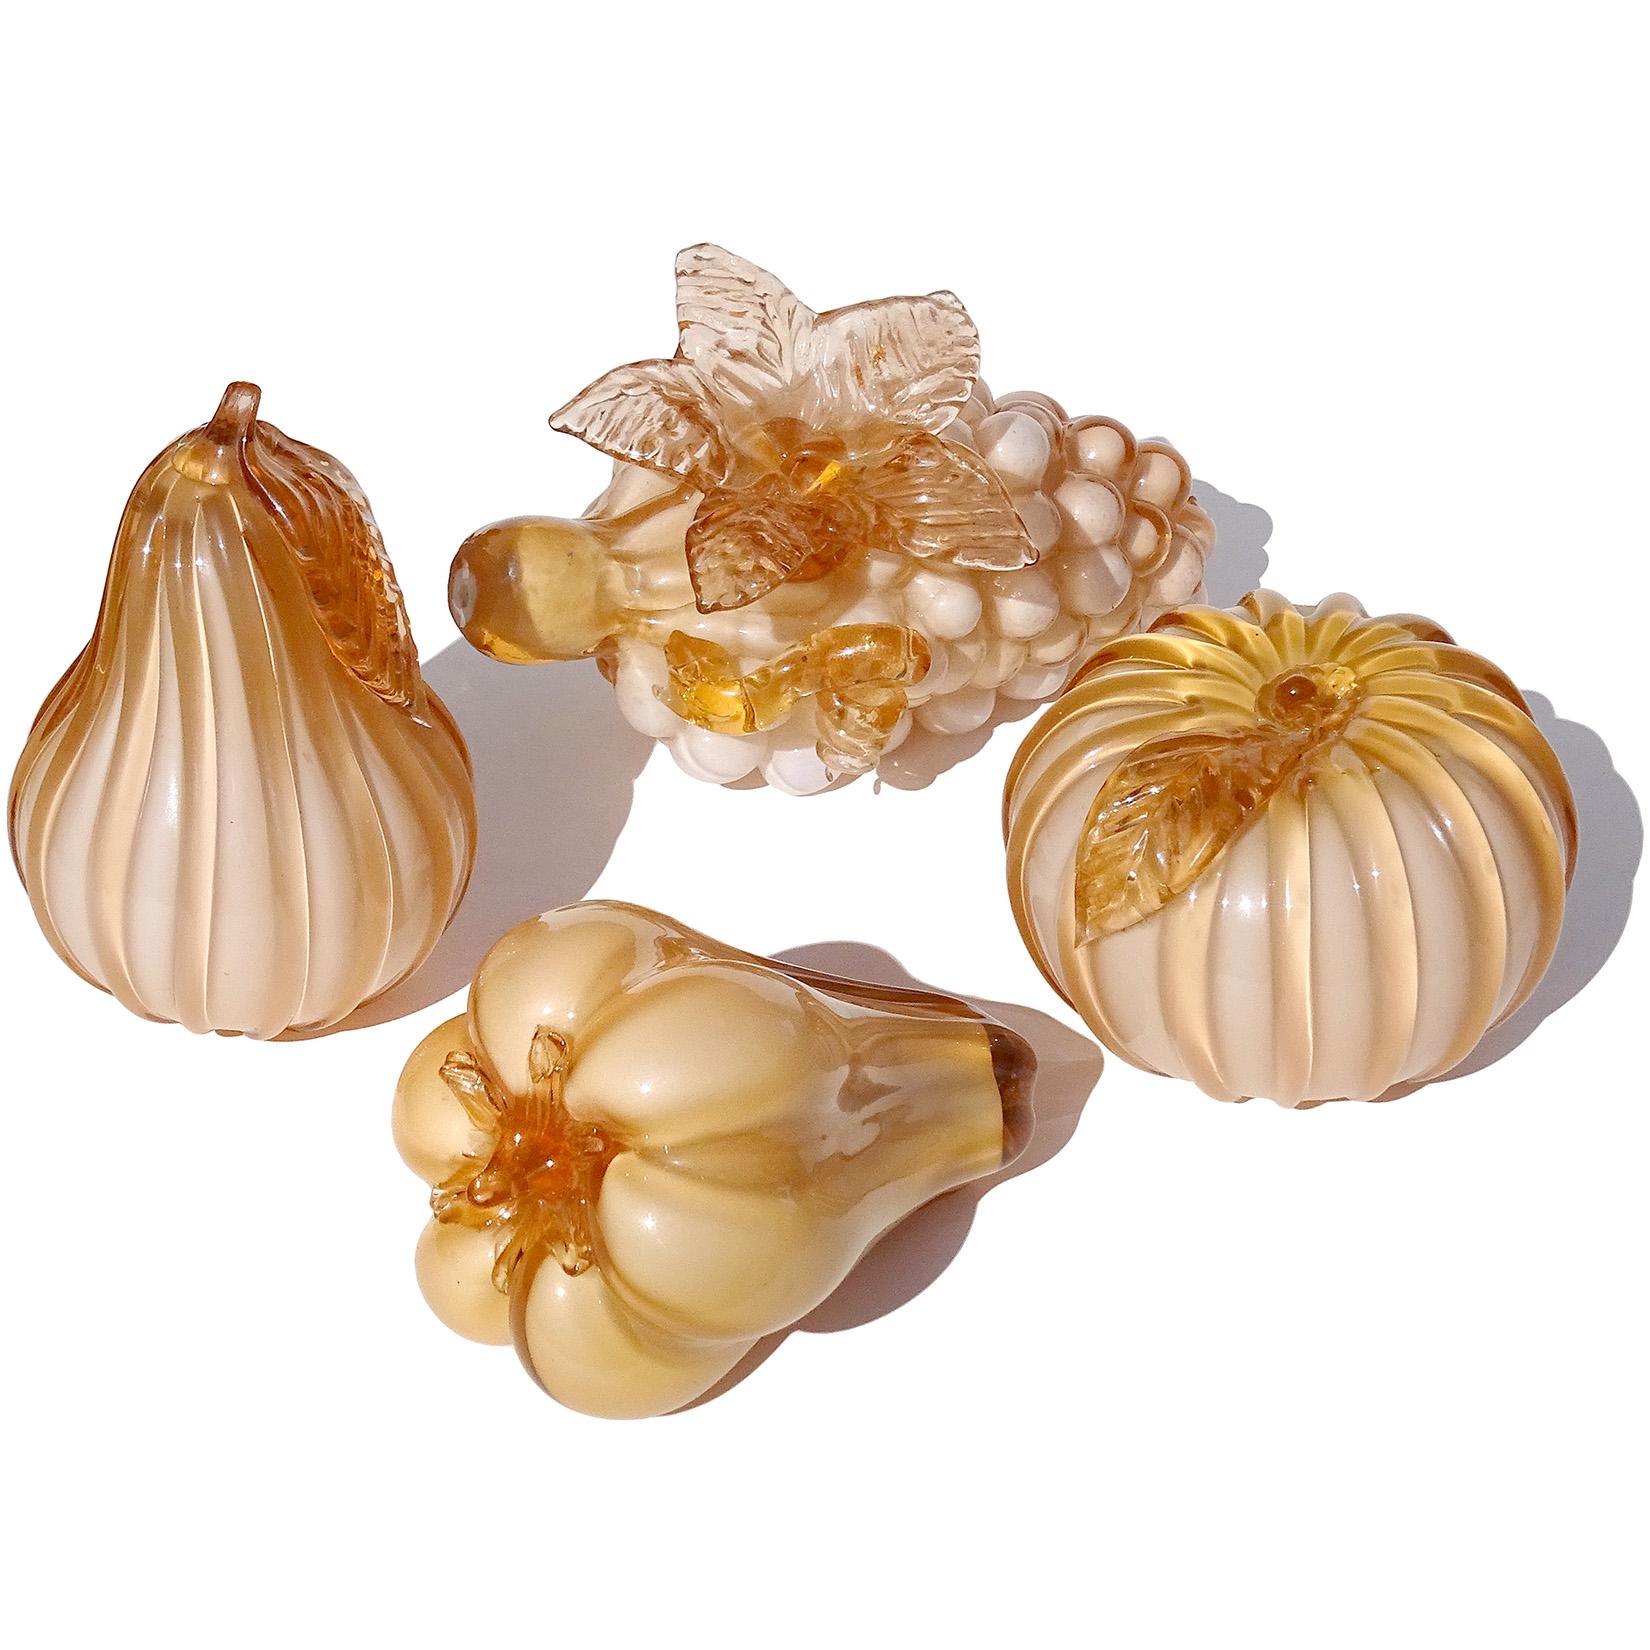 Beautiful vintage set of four hand blown peachy color Italian art glass fruit sculptural figural pieces. Attributed to the Empoli studio in Italy. They have an orange tint on the thicker glass parts. The set includes a bunch of grapes with attack